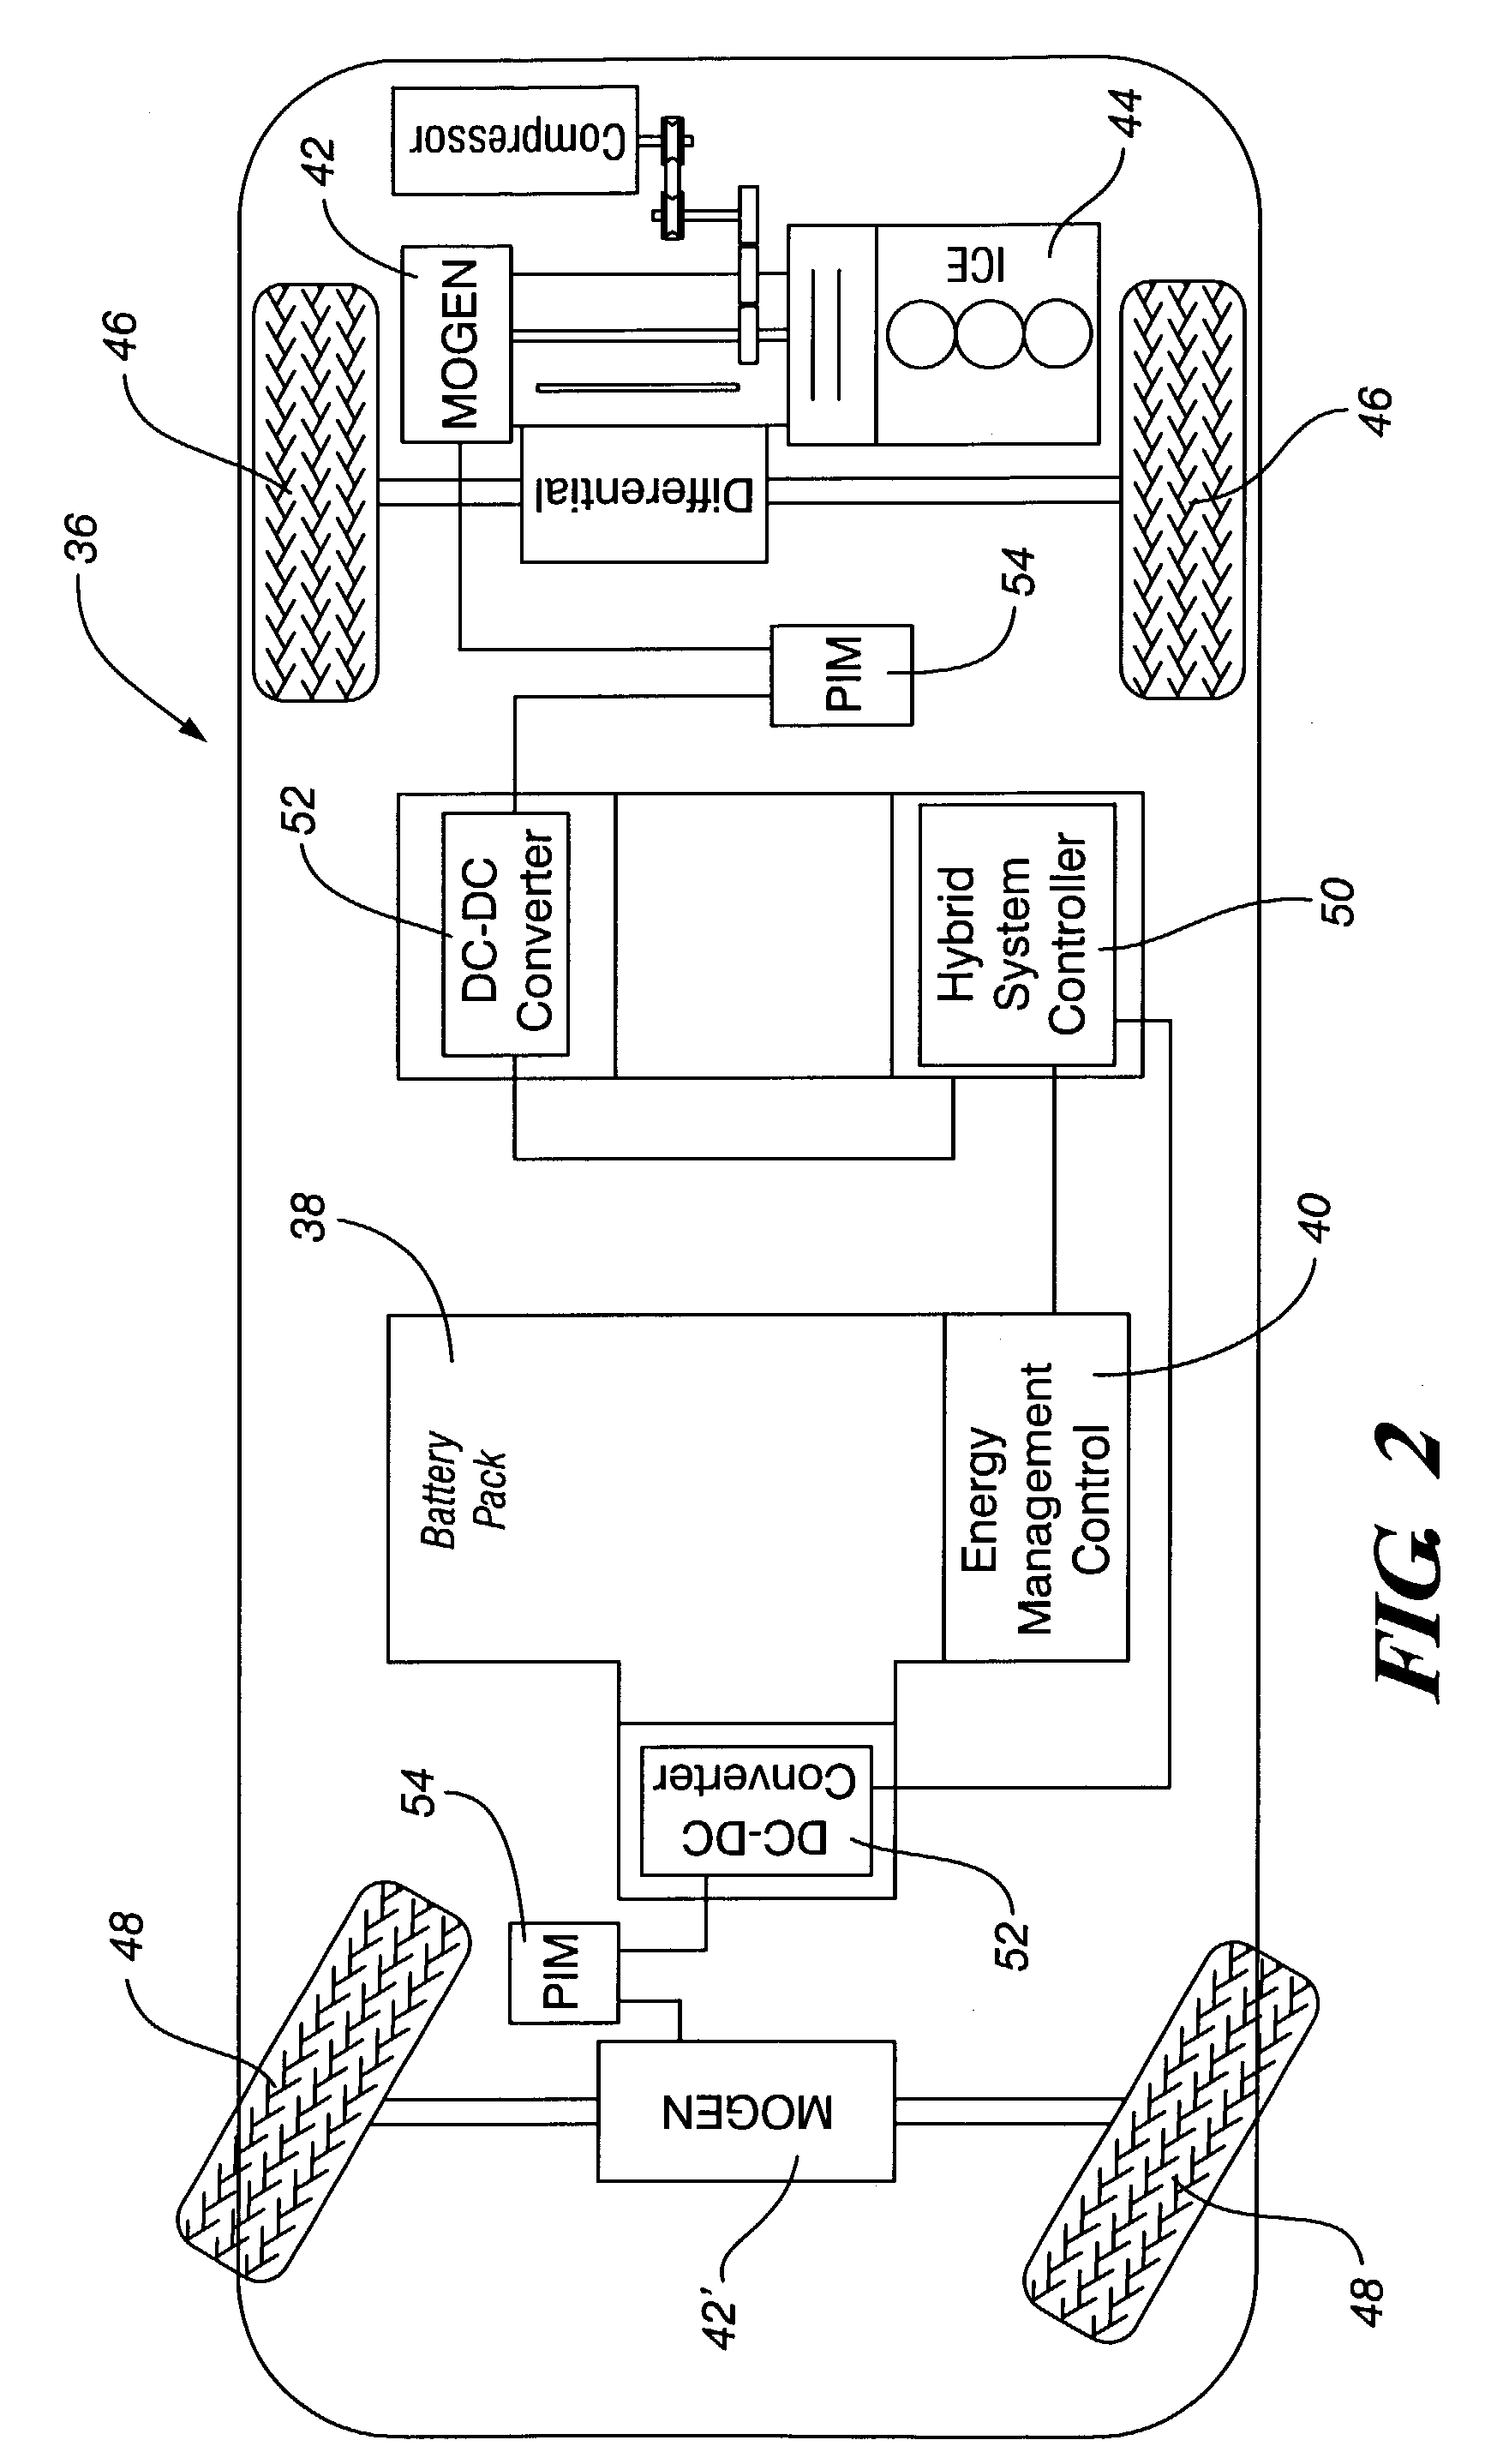 Method and apparatus for generalized recursive least-squares process for battery state of charge and state of health